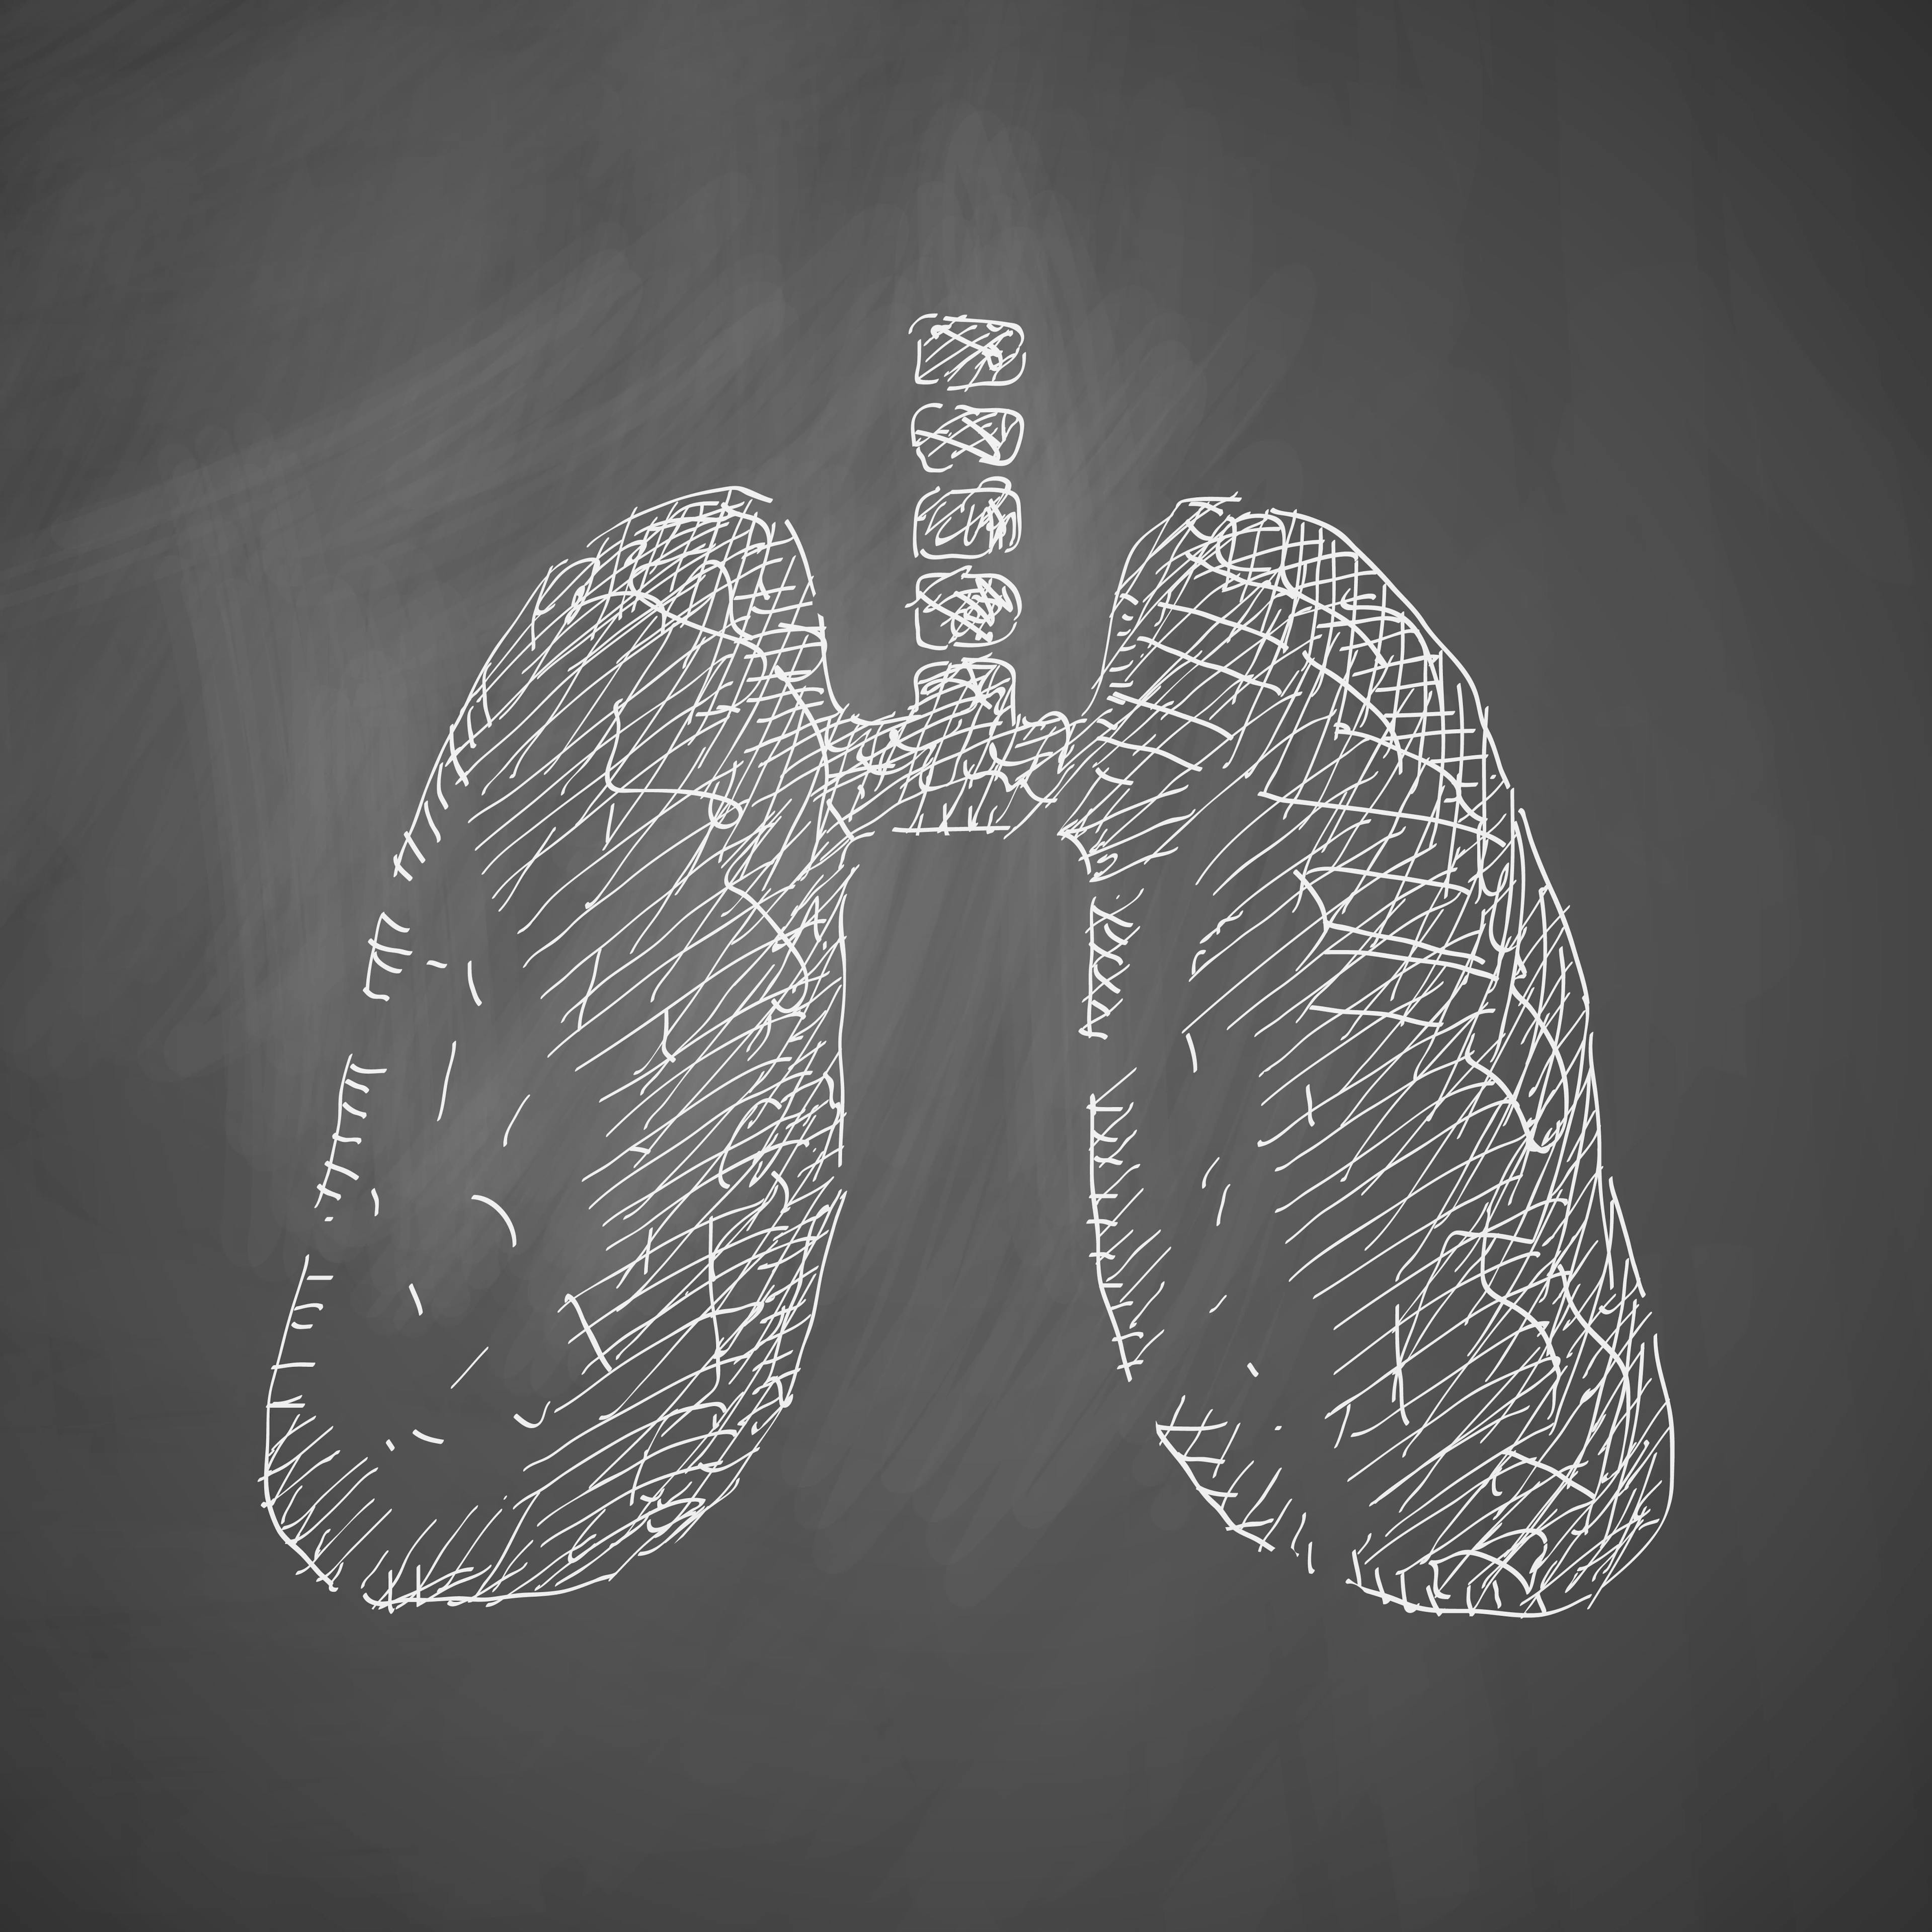 Sketch of lungs